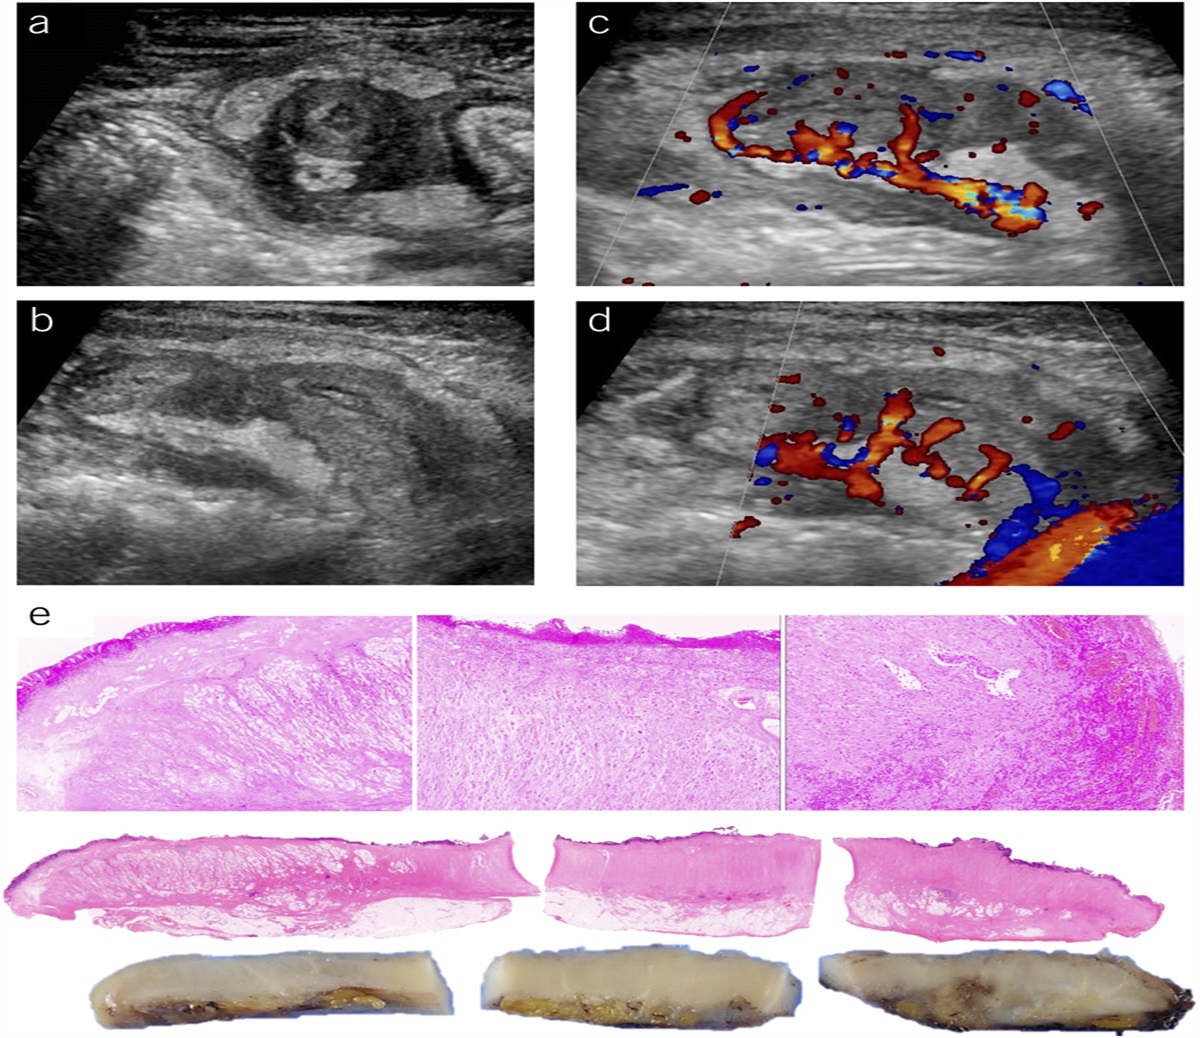 Utility of Abdominal Ultrasound in the Preoperative Diagnosis of Appendiceal Goblet Cell Adenocarcinoma